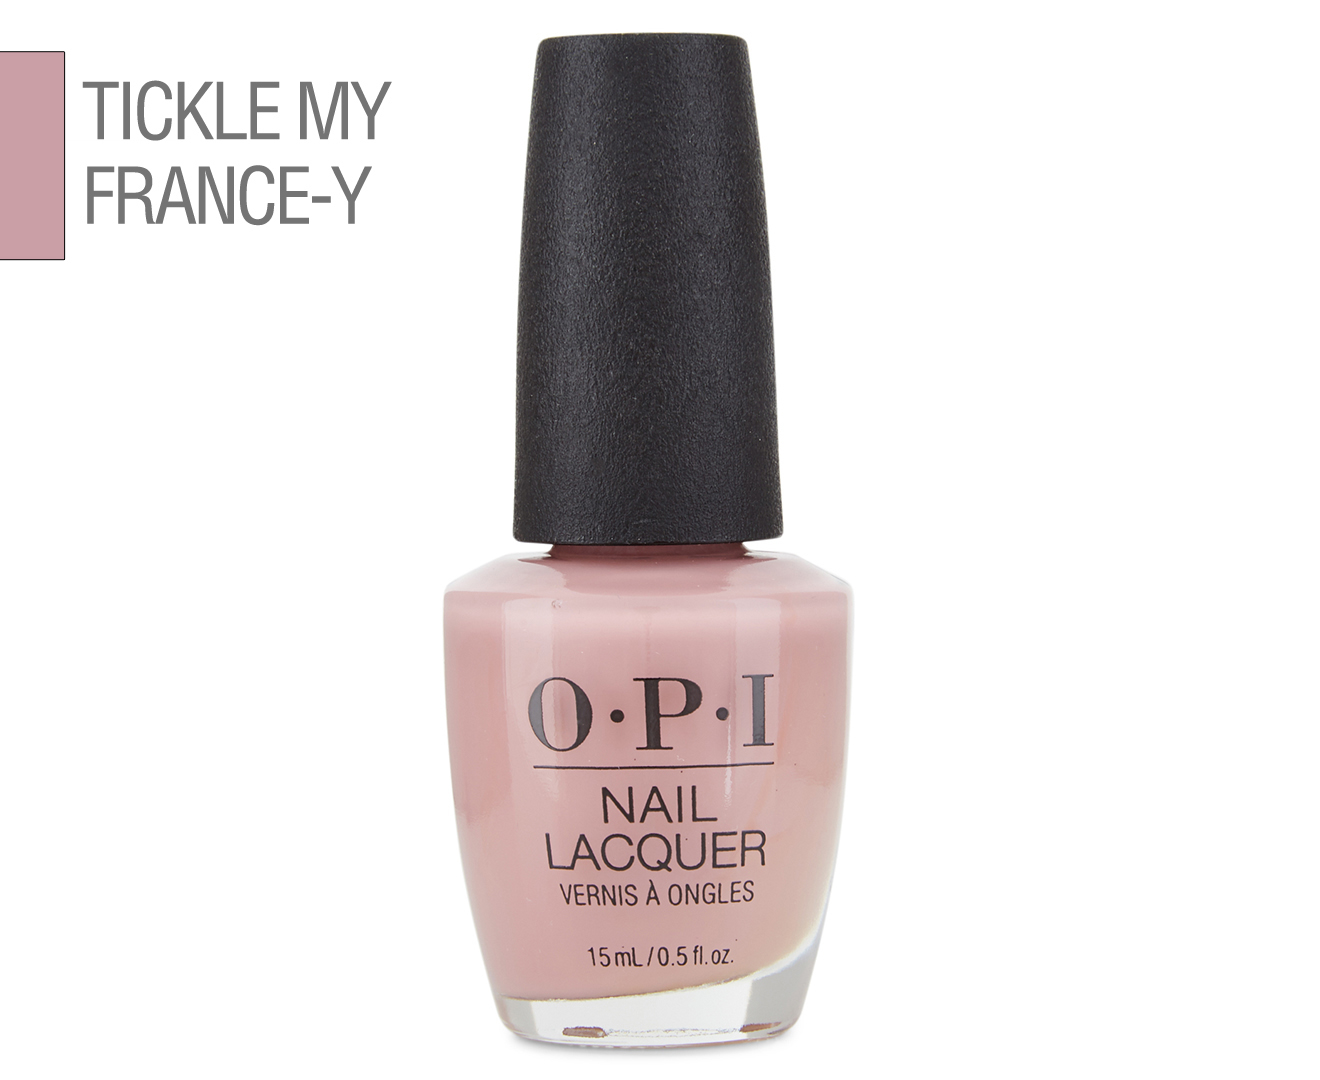 8. OPI Nail Lacquer in "Tickle My France-y" - wide 6